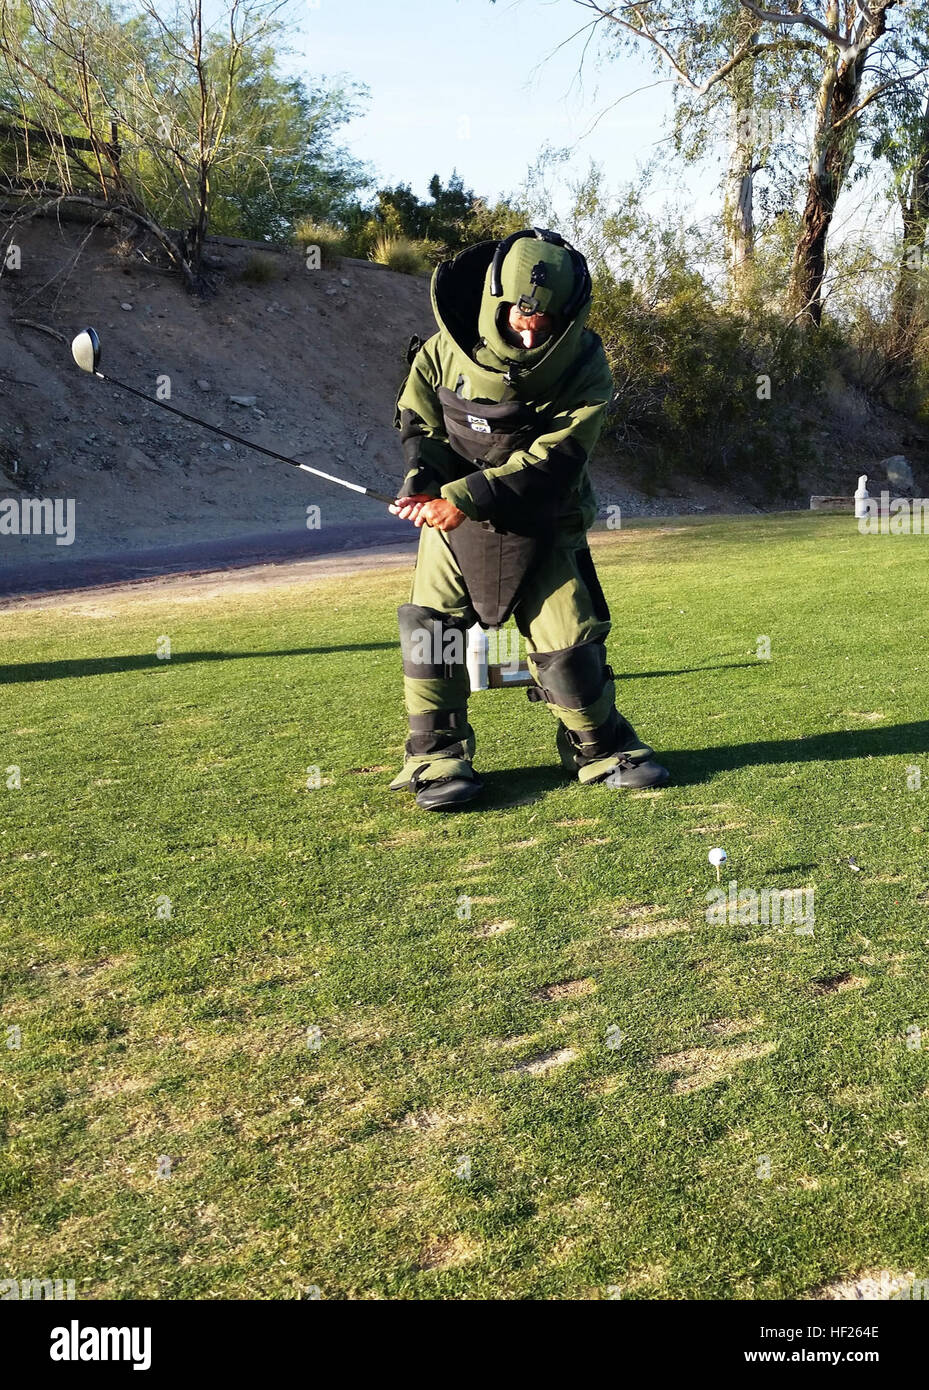 Marty Weibel takes a swing while wearing an Explosive Ordnance Disposal suit at Night-Ops V Charity Golf Tournament to benefit the Jared Allen's Homes for Wounded Warriors here May 17. Two dozen Guard members volunteered more than 200 personal hours setting up mock Army scenarios at six different golf holes for participants of the celebrity golf tournament to provide an example of the life of a Soldier. (National Guard photo by Army Sgt. Crystal Reidy) Guard volunteers take a swing at charity 140517-Z-ZZ999-011 Stock Photo